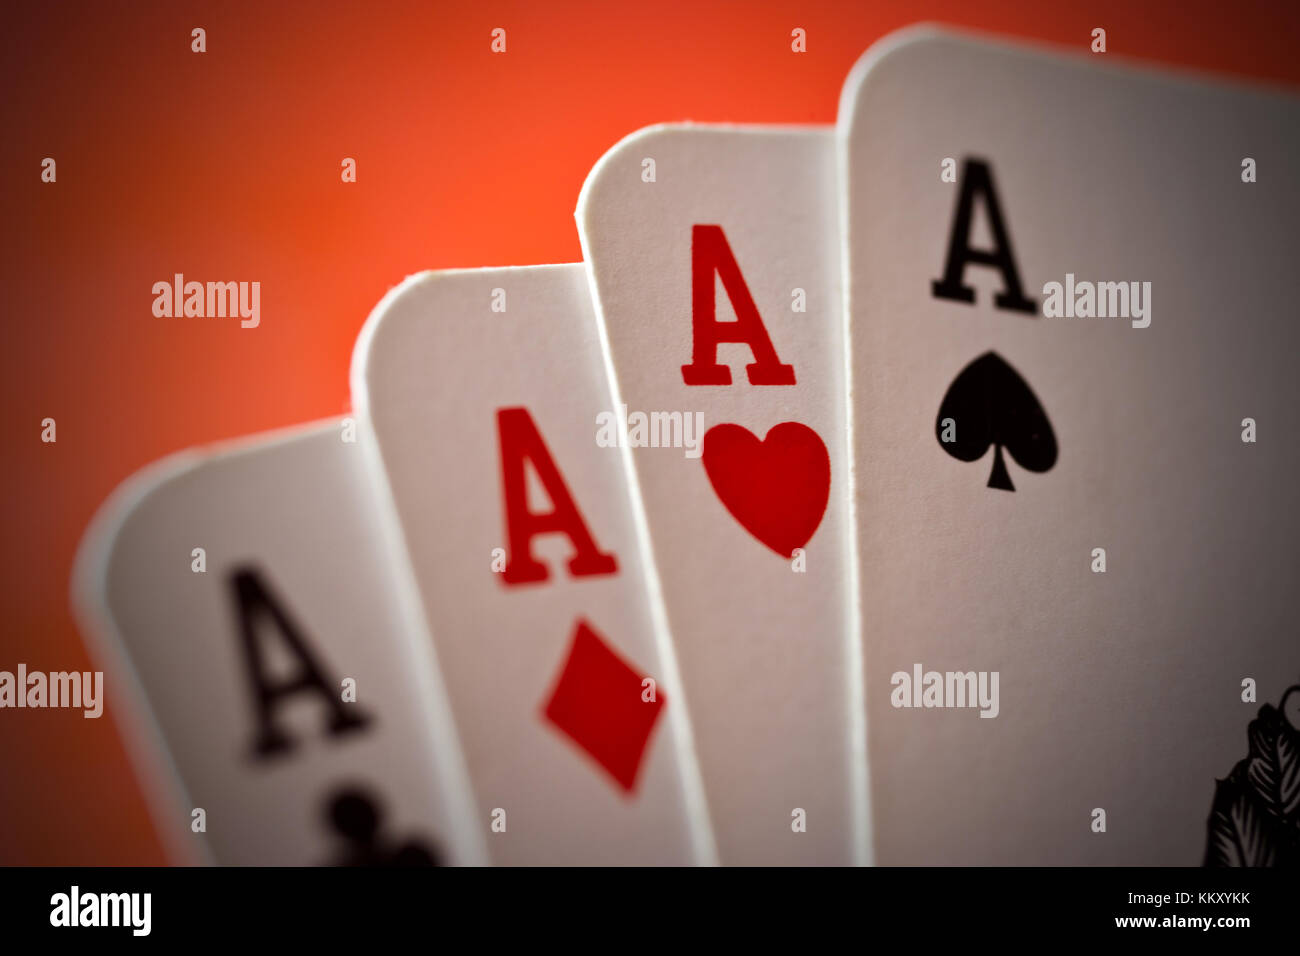 ace playing cards /  A ace cards on the red background Stock Photo